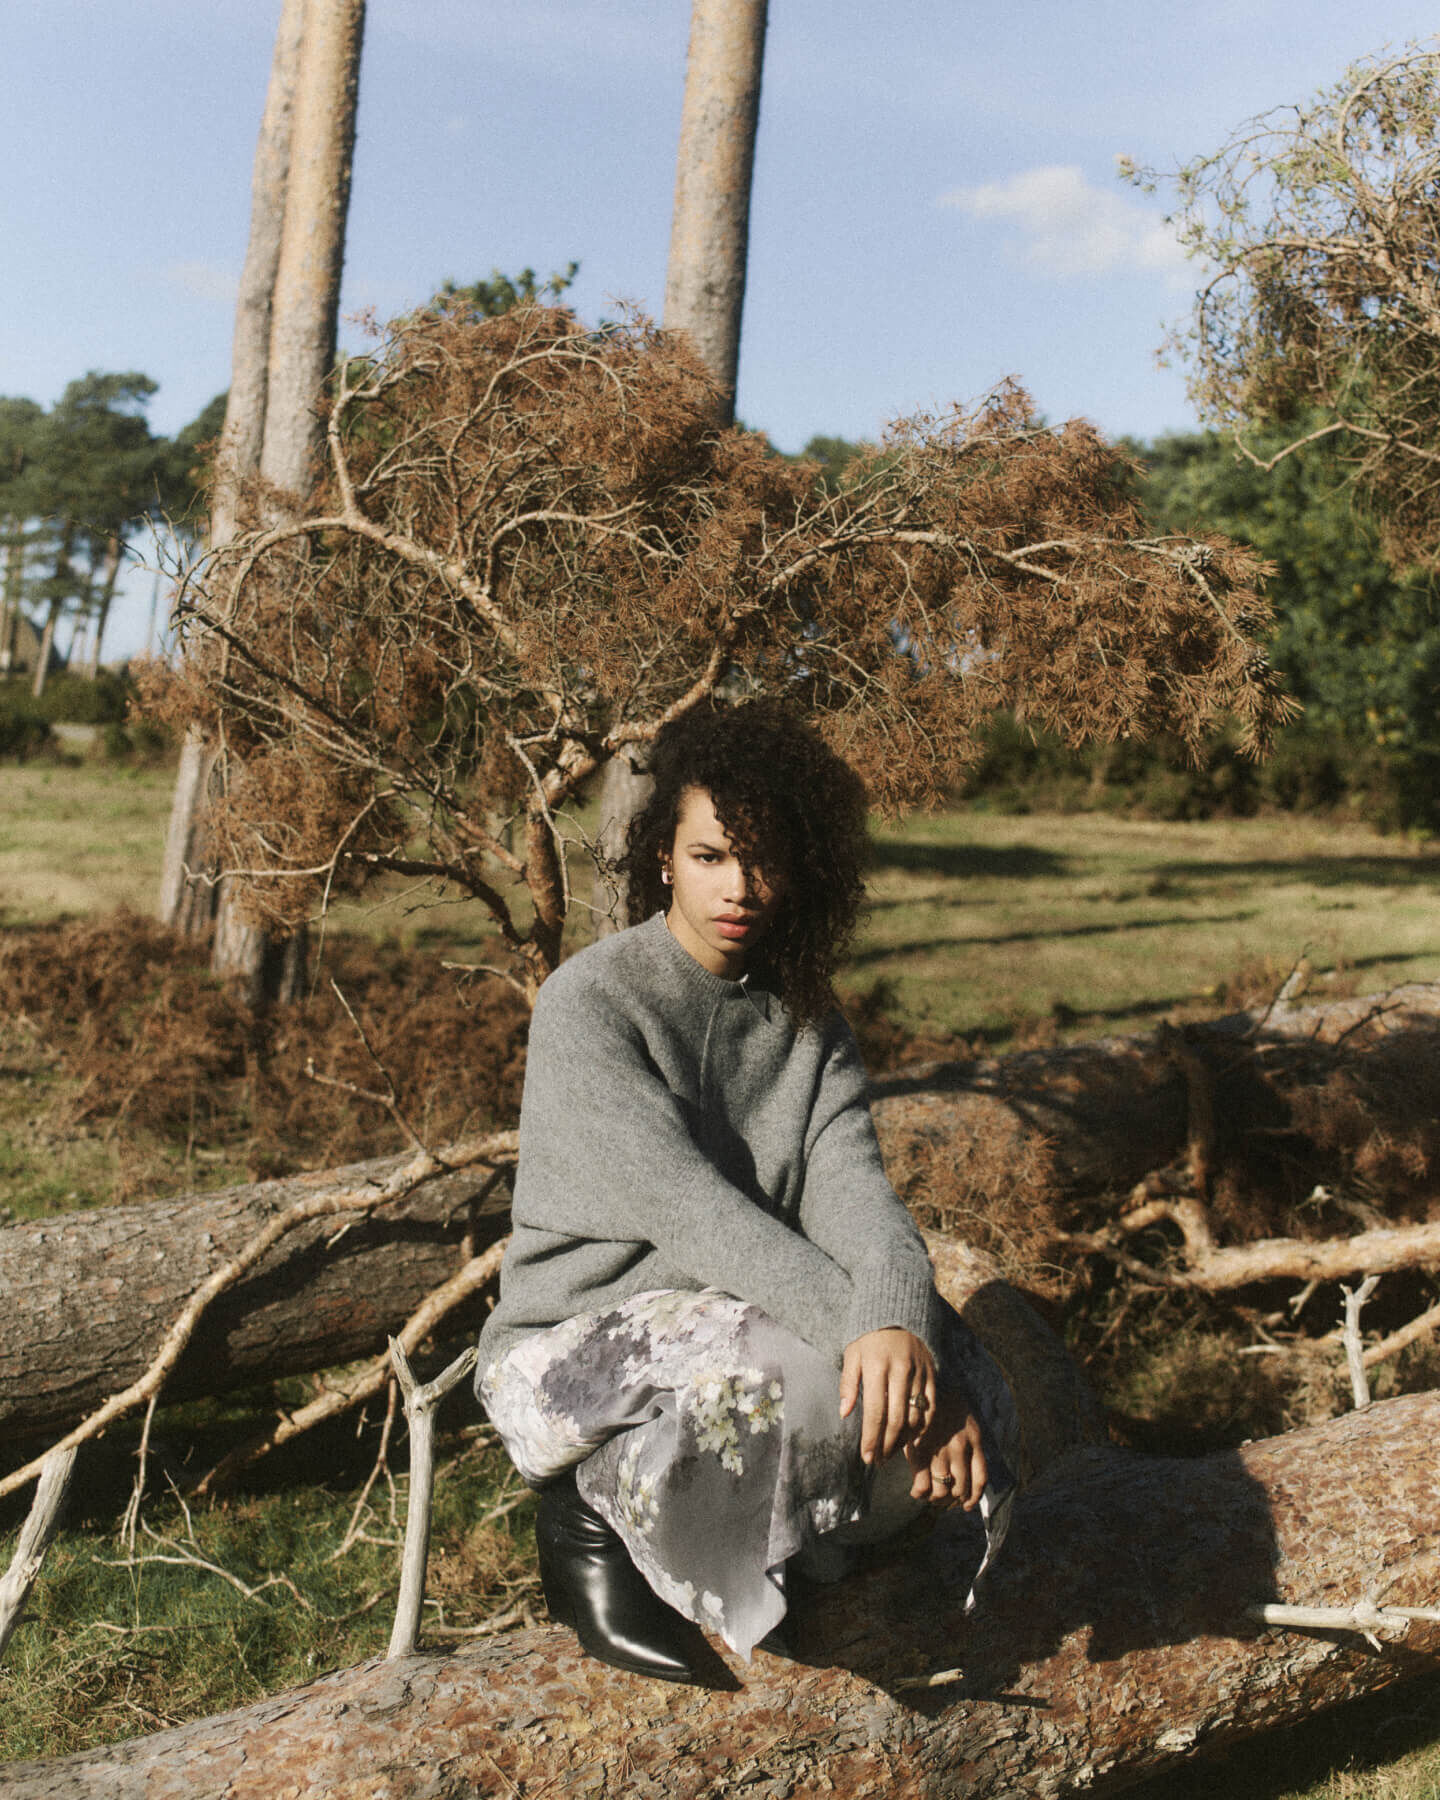 Woman in a grey jumper and dress with black leather boots crouching on a fallen tree